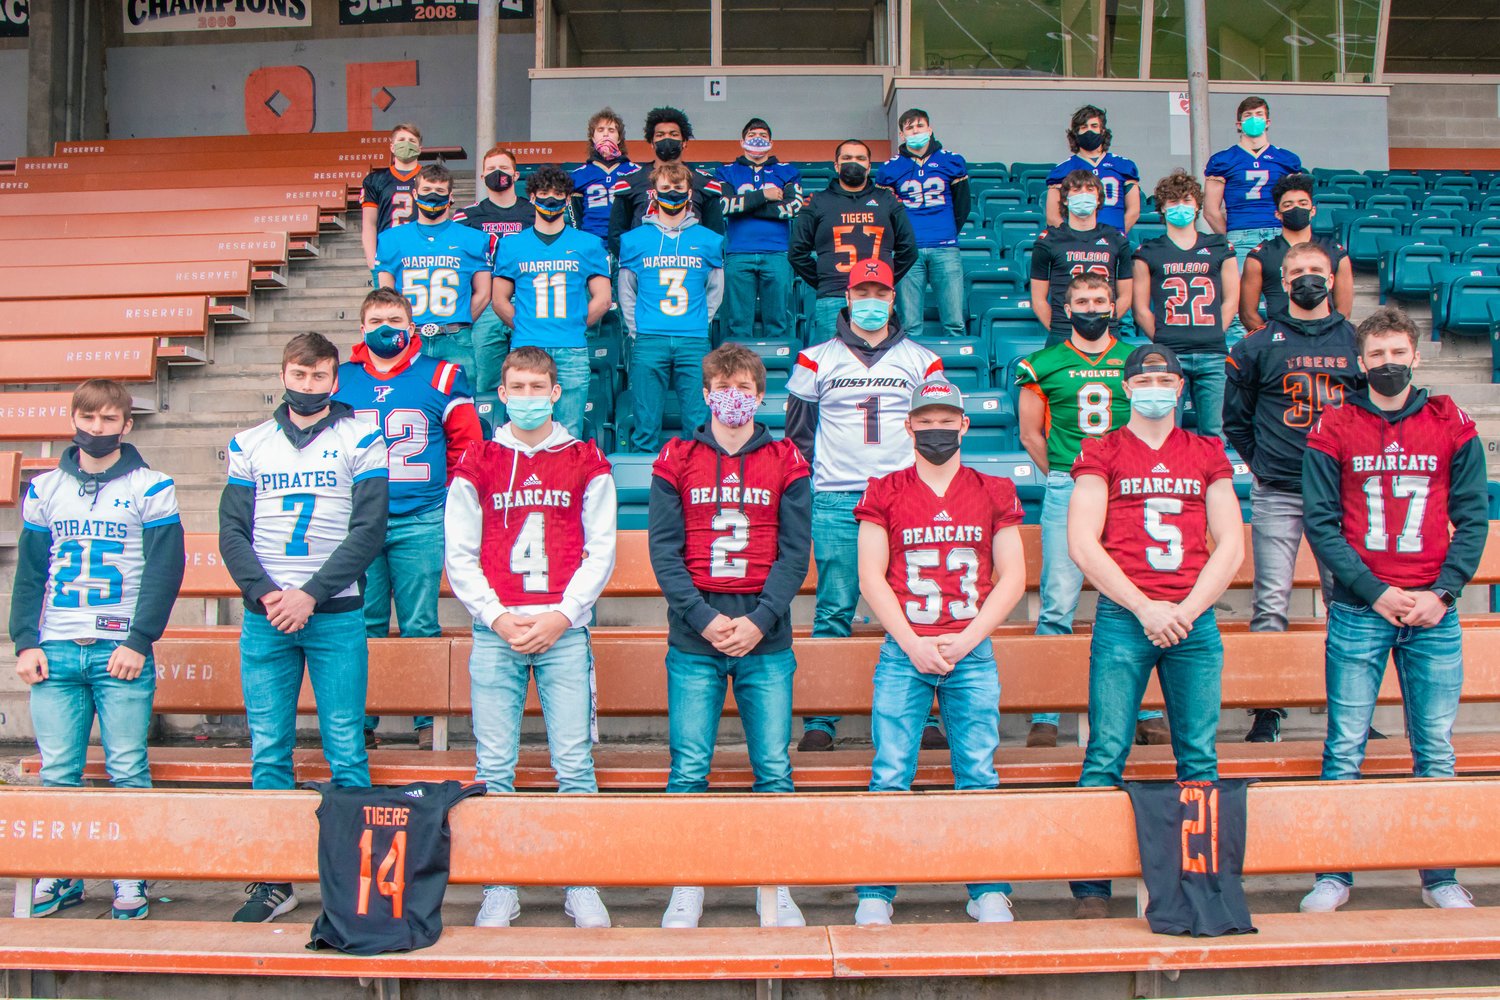 Athletes chosen for the All-Area Football team pose for a photo at Tiger Stadium sporting their school’s football jerseys.